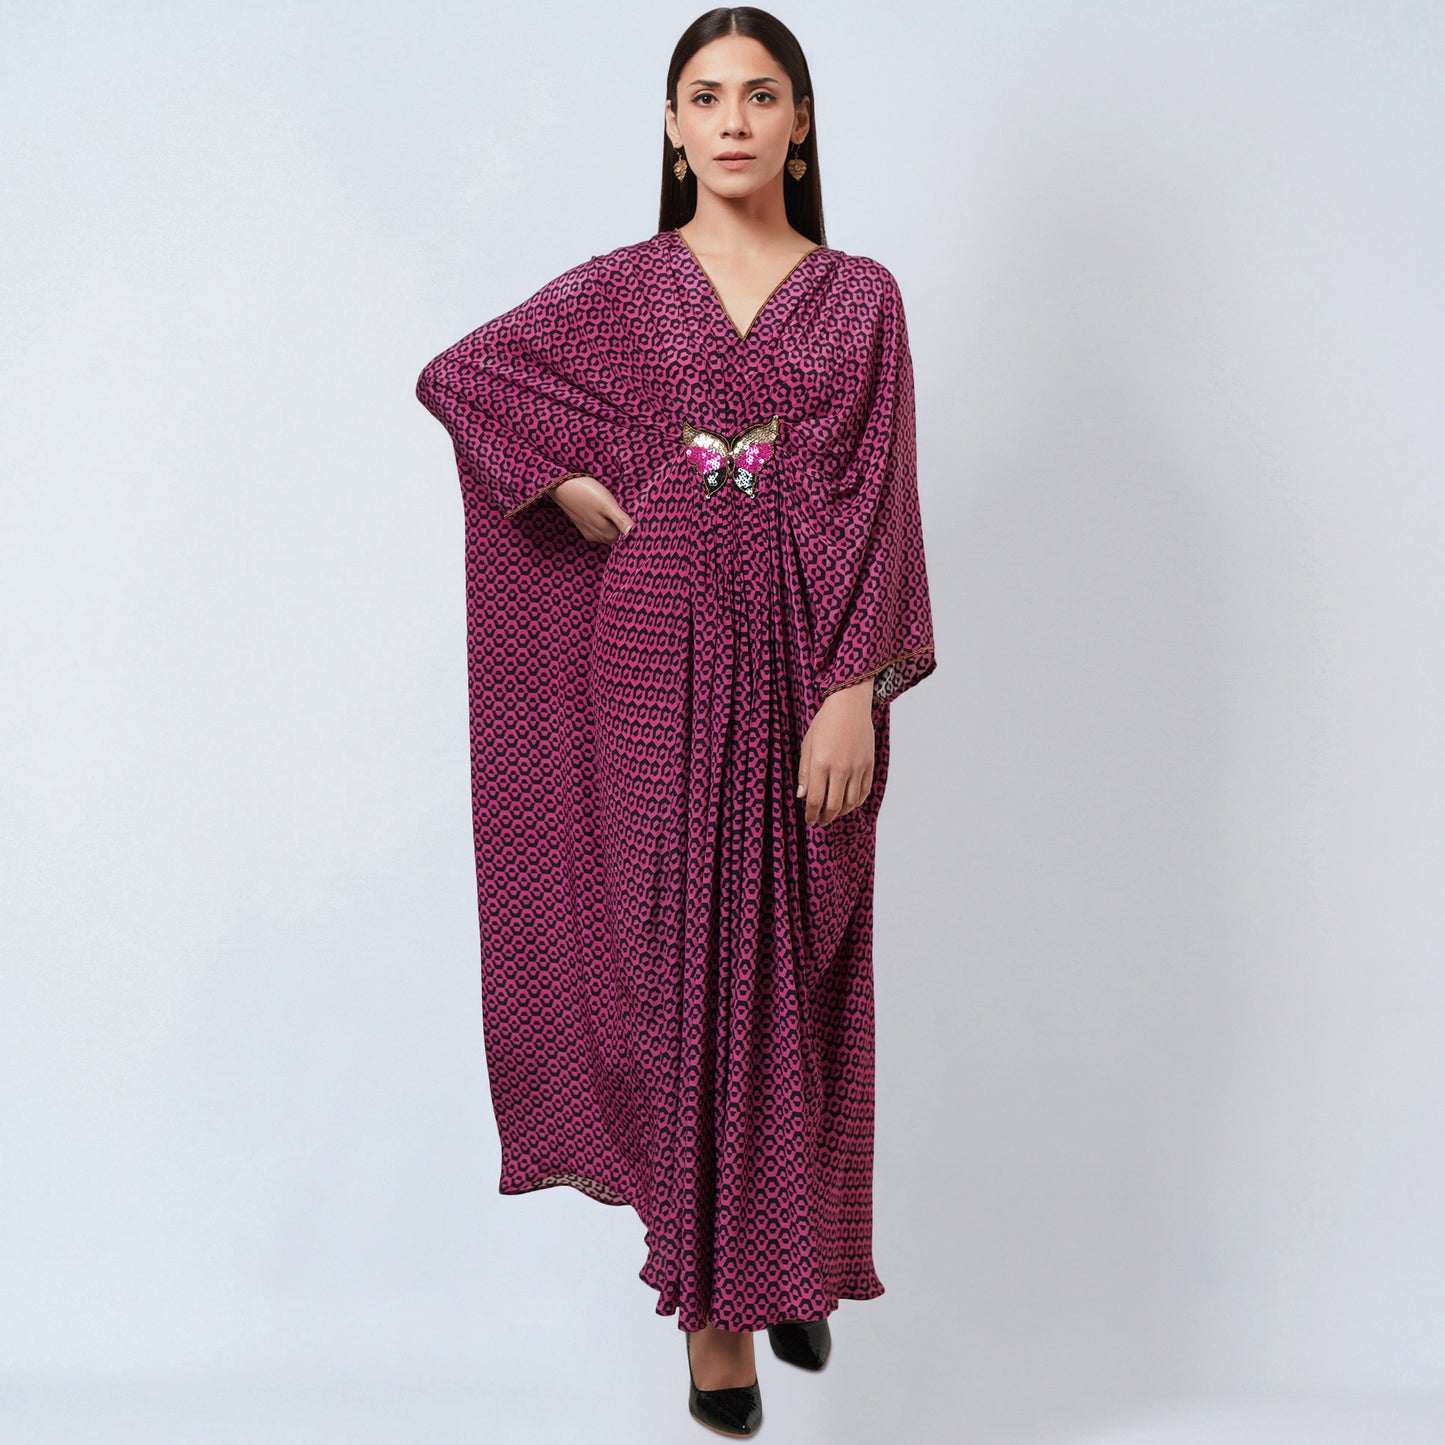 Image of Look stunning in this MAGENTA HONEYCOMB PRINT SILK FULL LENGTH KAFTAN WITH BUTTERFLY MOTIF from our Kaftan Collection. Crafted from lightweight silk, this full-length kaftan is decorated with an intricately patterned honeycomb print and a delicate butterfly motif. It's sure to elevate your formal wardrobe.  From savoirfashions.com